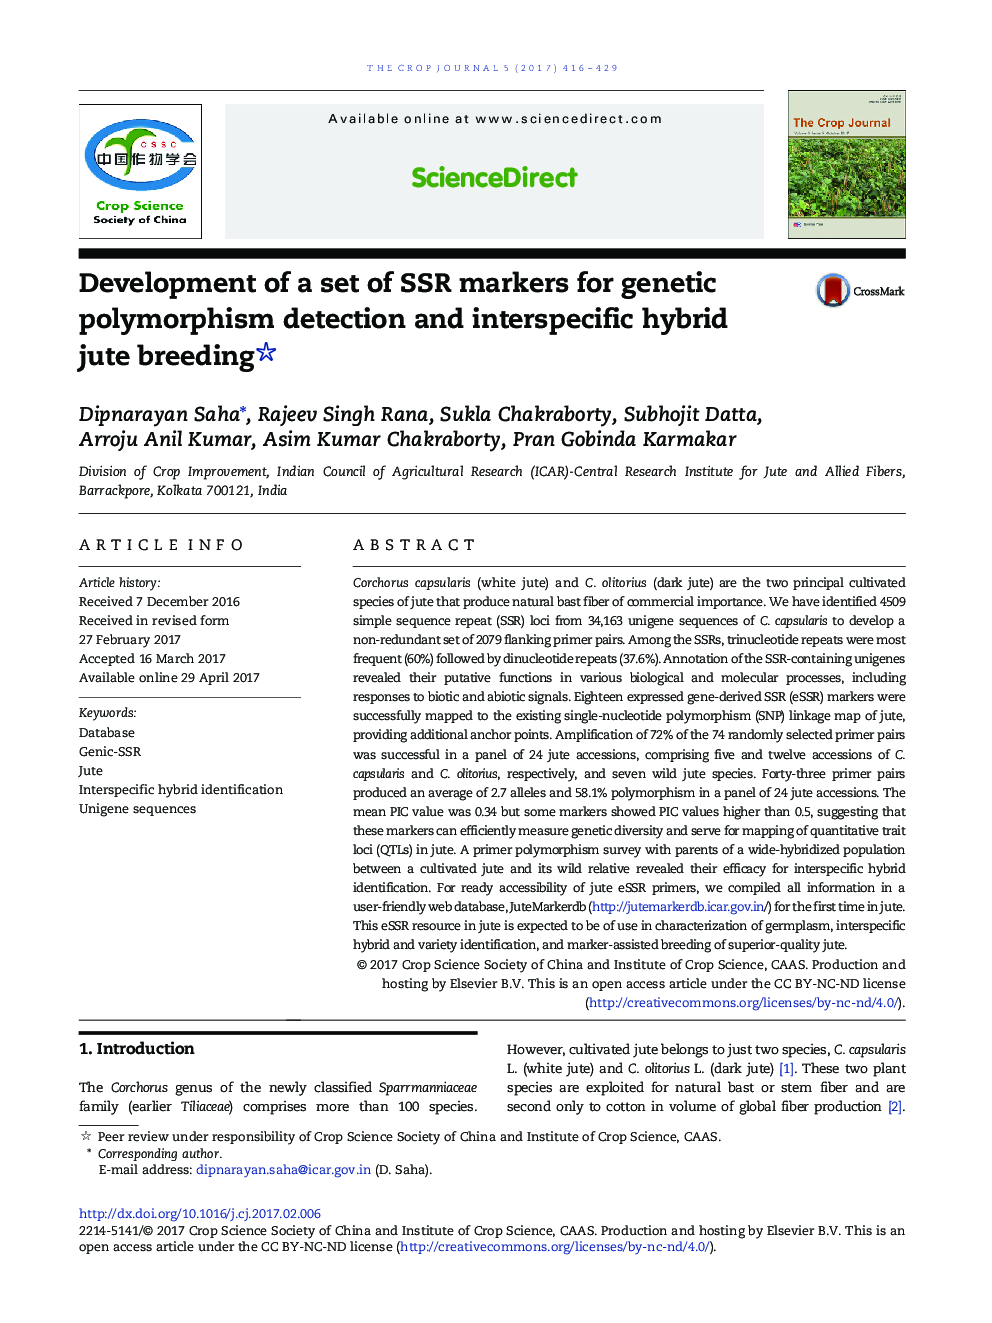 Development of a set of SSR markers for genetic polymorphism detection and interspecific hybrid jute breeding